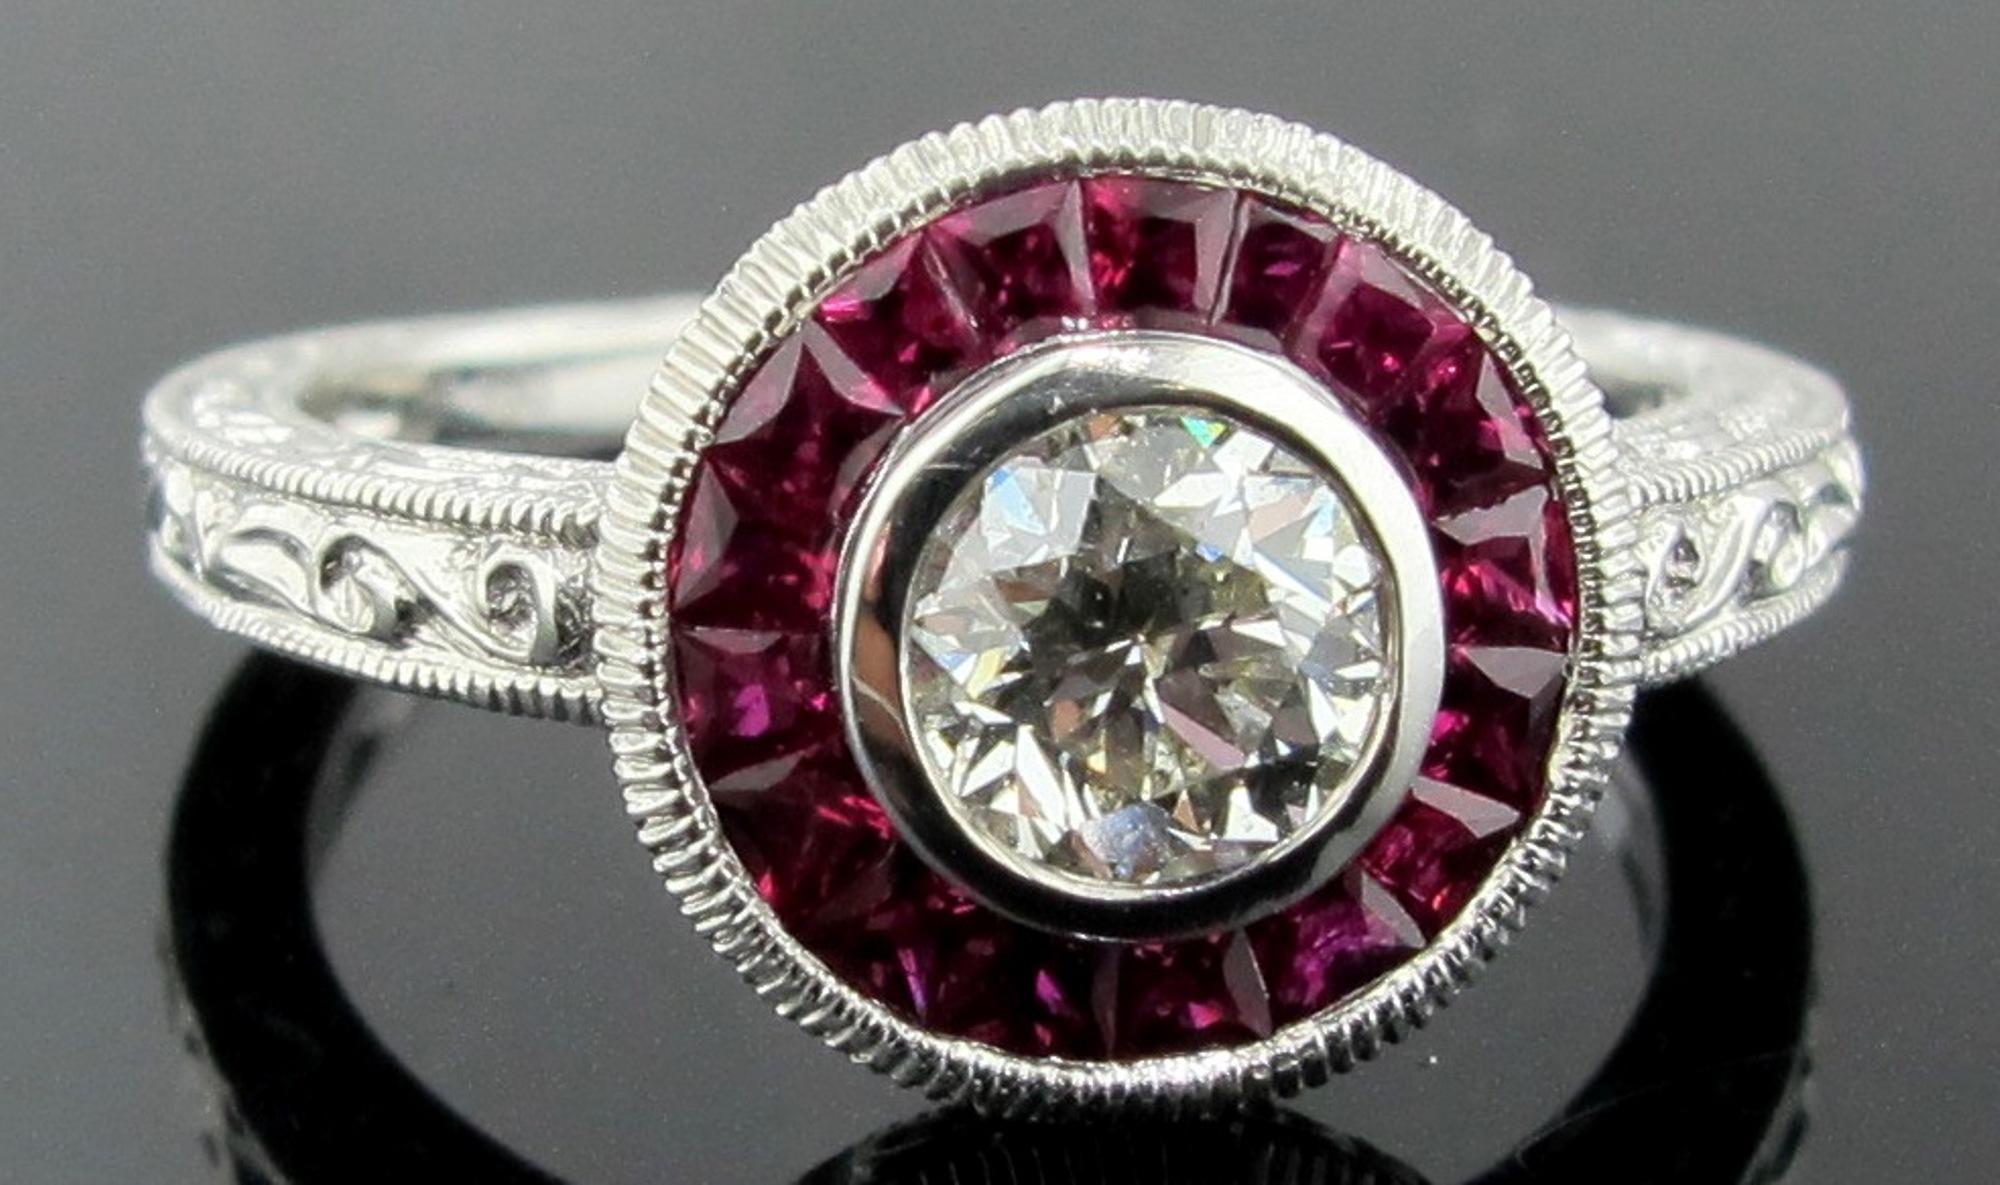 18 karat white gold Diamond ring with a center round cut diamond weighing 0.50 carats.  The center diamond is surrounded with 0.60 carats of calibrated rubies.  Ring size is 6.5.